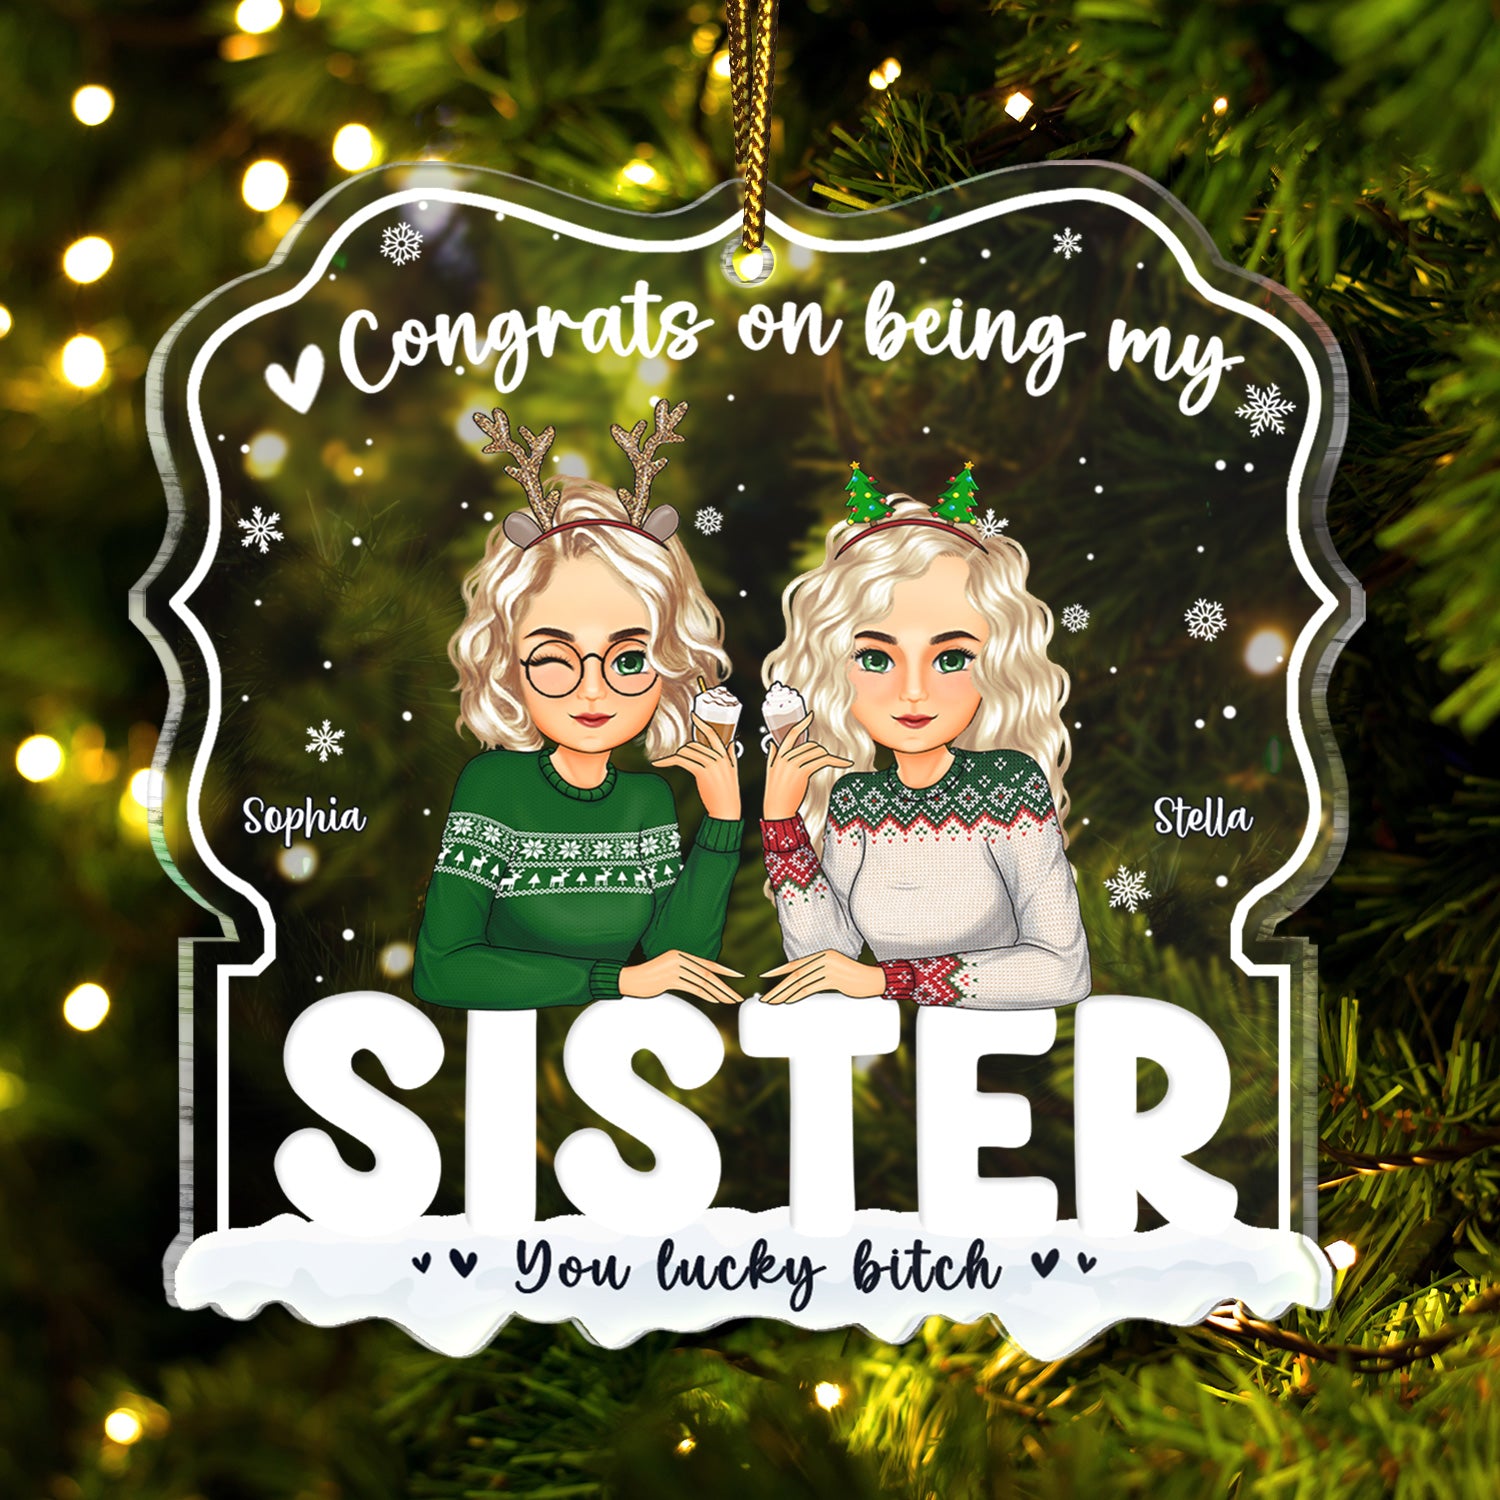 Congrats On Being My Besties - Gift For Sisters, Besties, Brother - Personalized Custom Shaped Acrylic Ornament